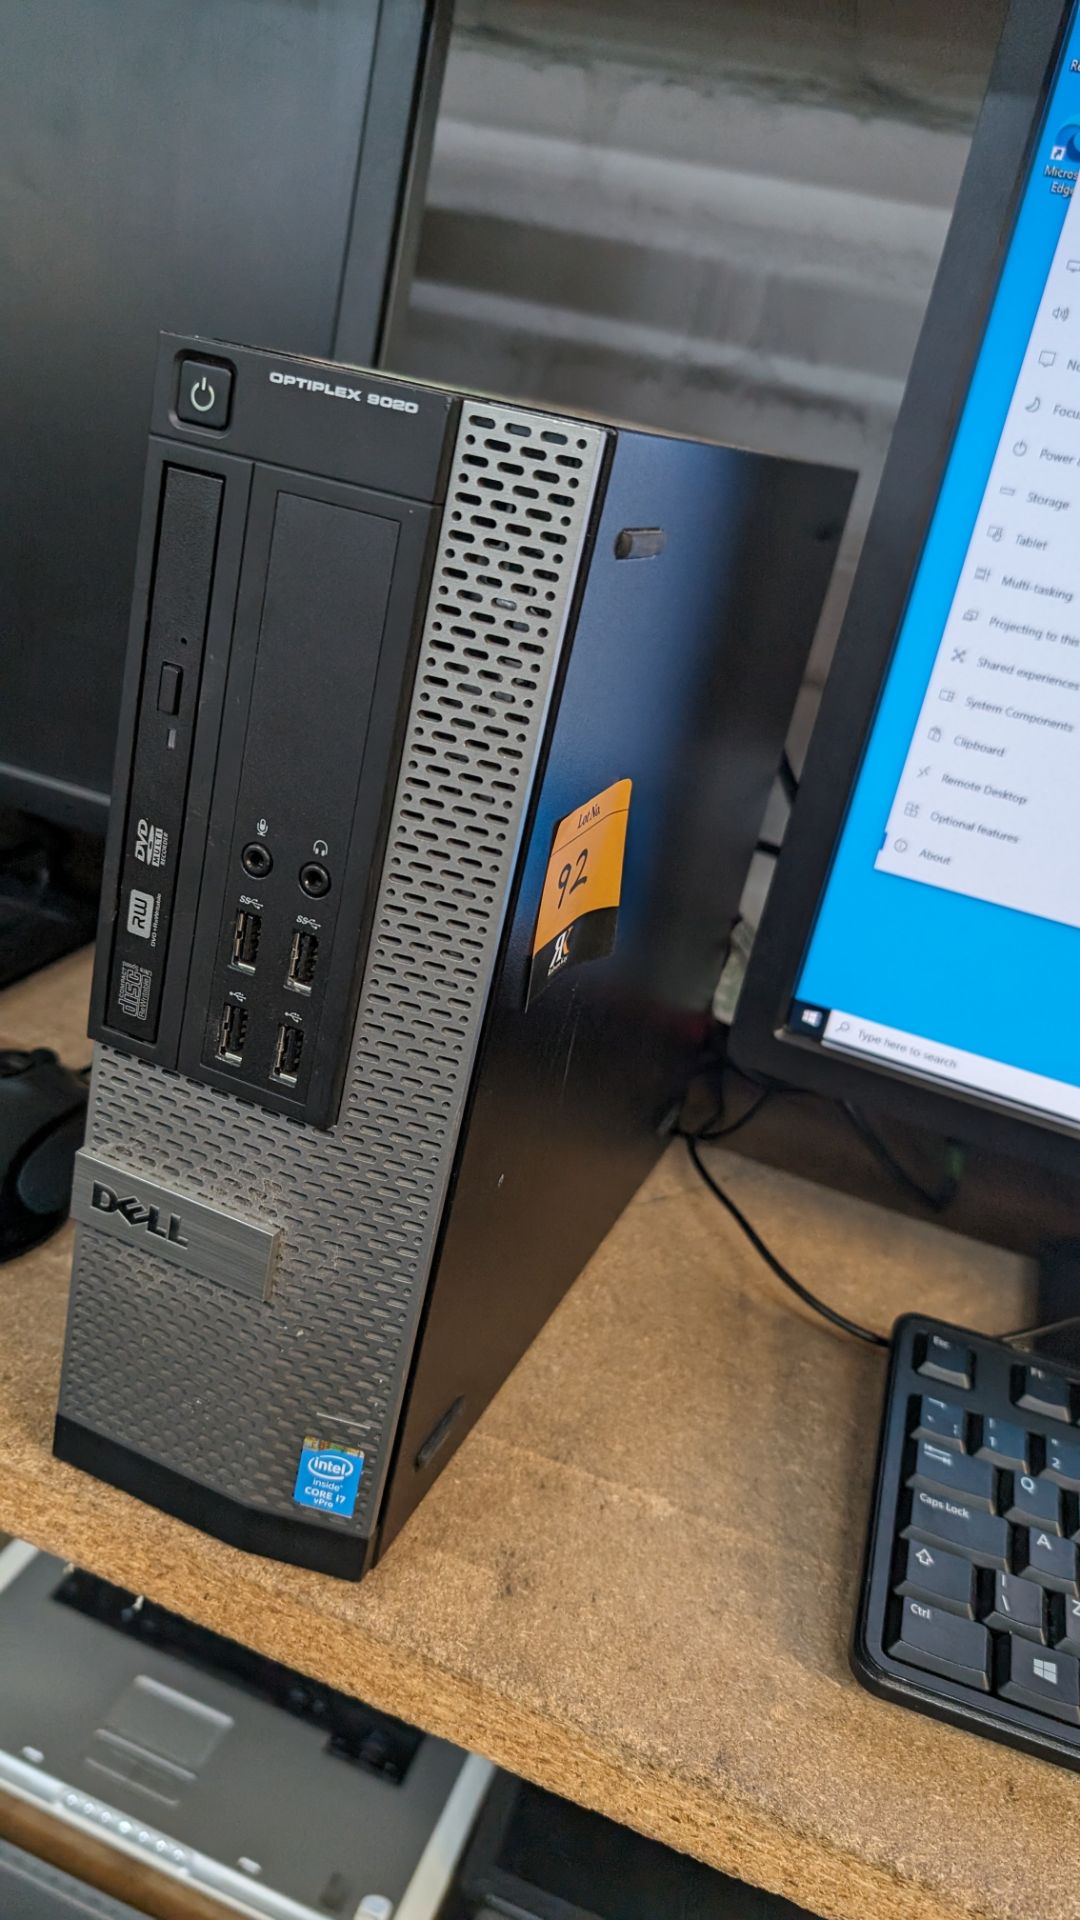 Dell Optiplex 9020 compact tower computer with Intel i7 vPro processor, including widescreen monitor - Image 13 of 18